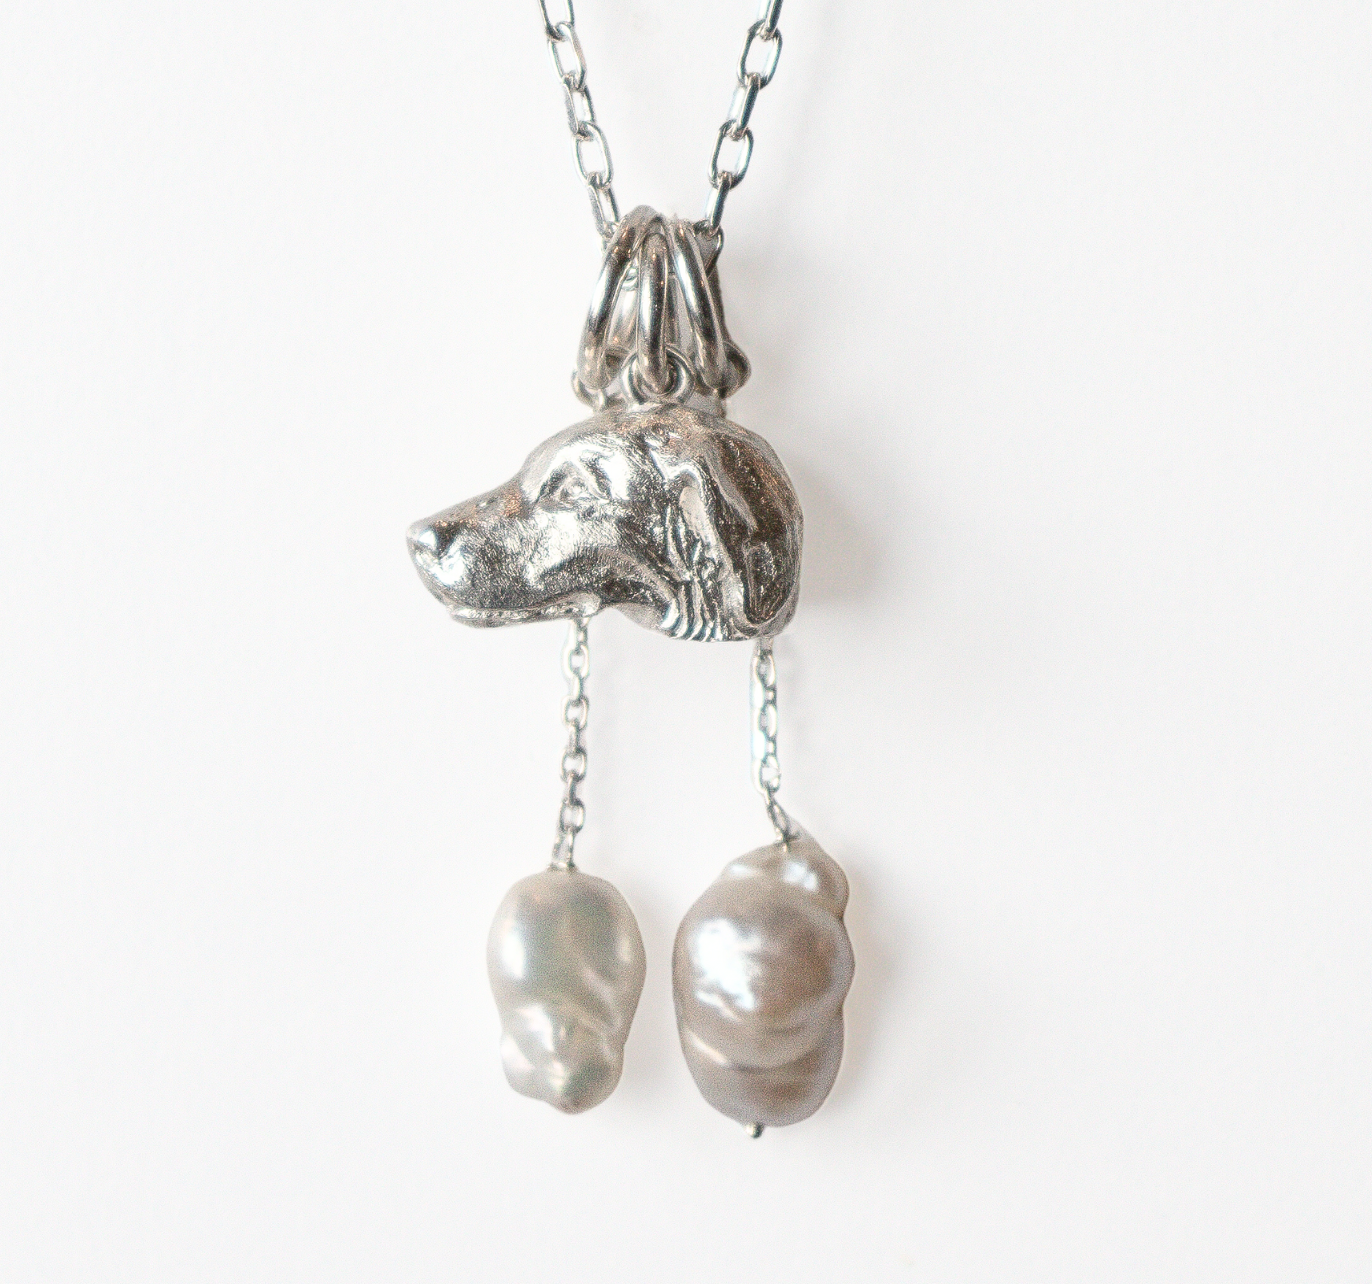 Retriever Pendant with Pearl Drops by Sculptor Paul Eaton